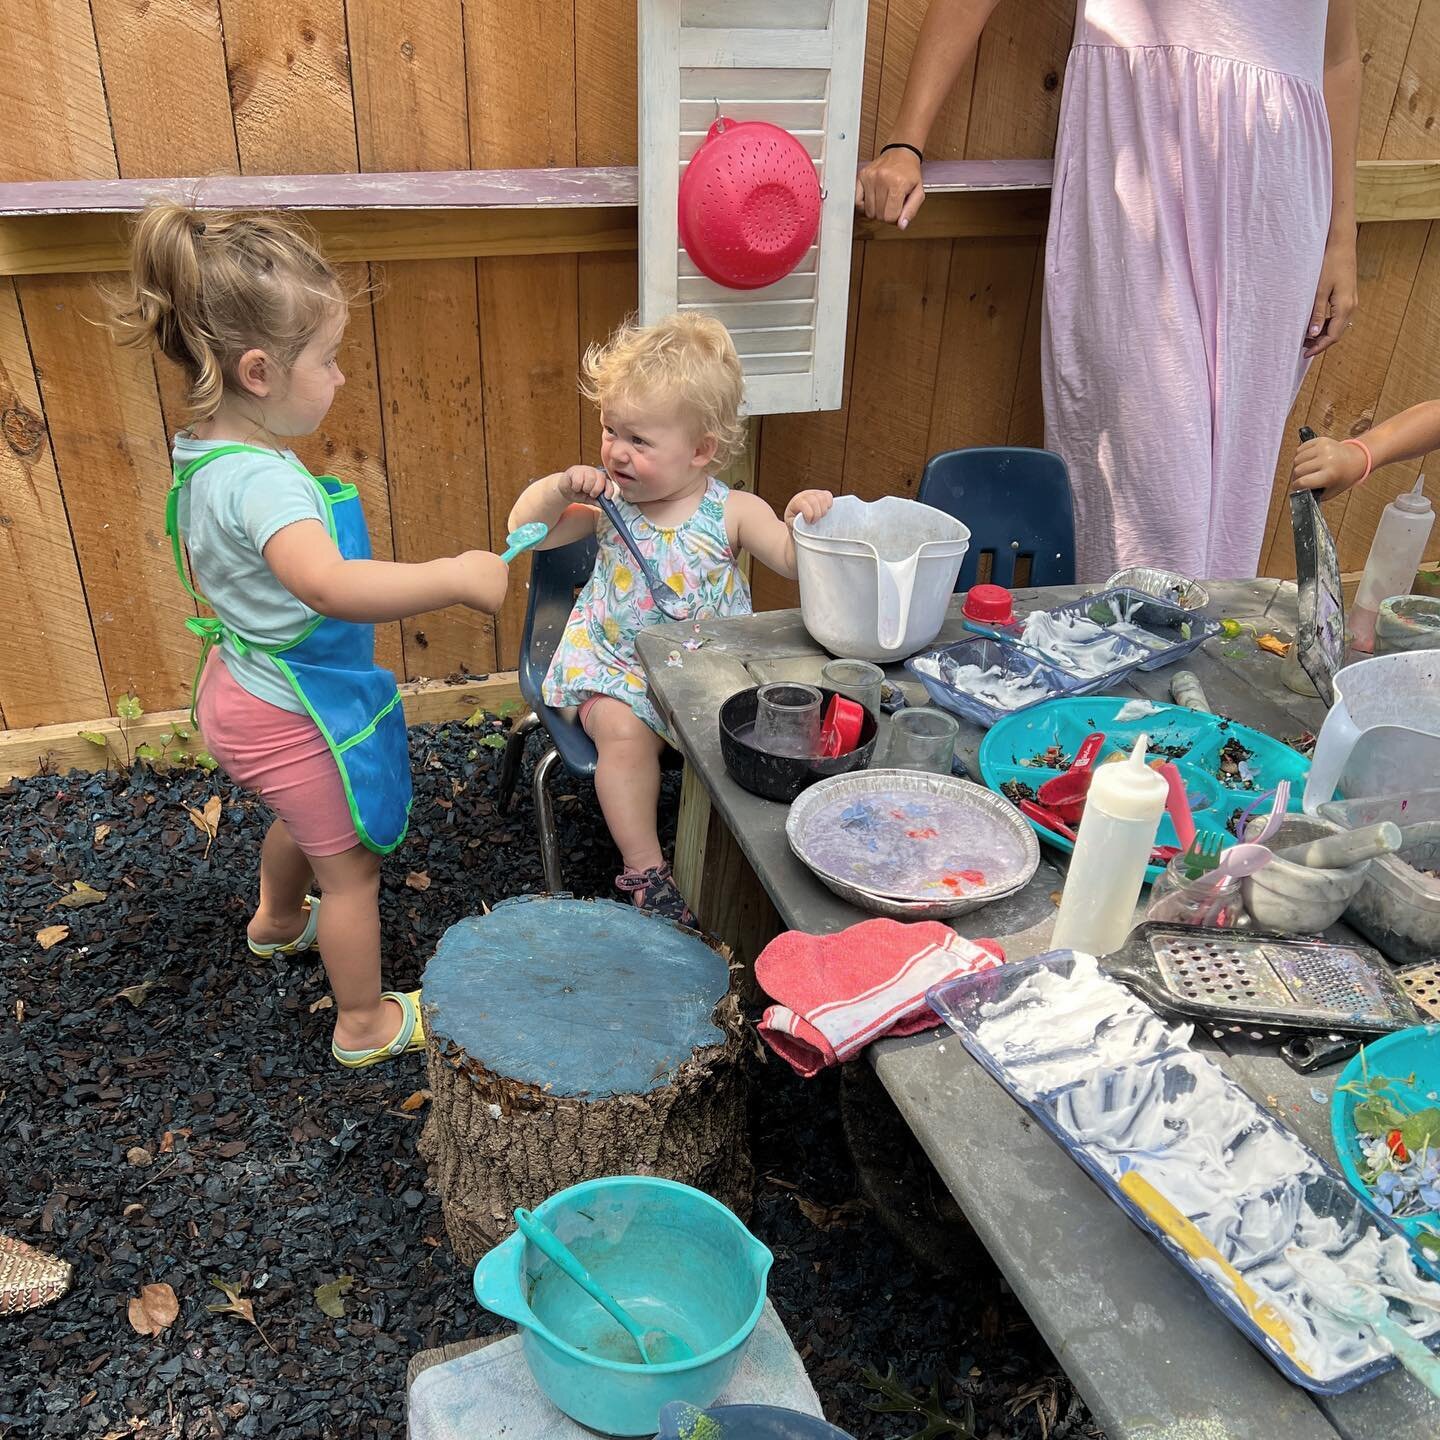 Hello fall!⁣
Welcome Thursday mornings at #HCAoutside 🍂🍁🎨⁣
⁣(AND Mud Kitchen Camp&hellip;⁣
scroll ⬇️)⁣
⁣

Thursday morning Outdoor Creative Play Sessions: 
9/8
9:30-10:30
10:45-11:30
9/15
10:45-11:30
Links in bio!

⁣
Extra special!⁣
9/15 9:30-10:1